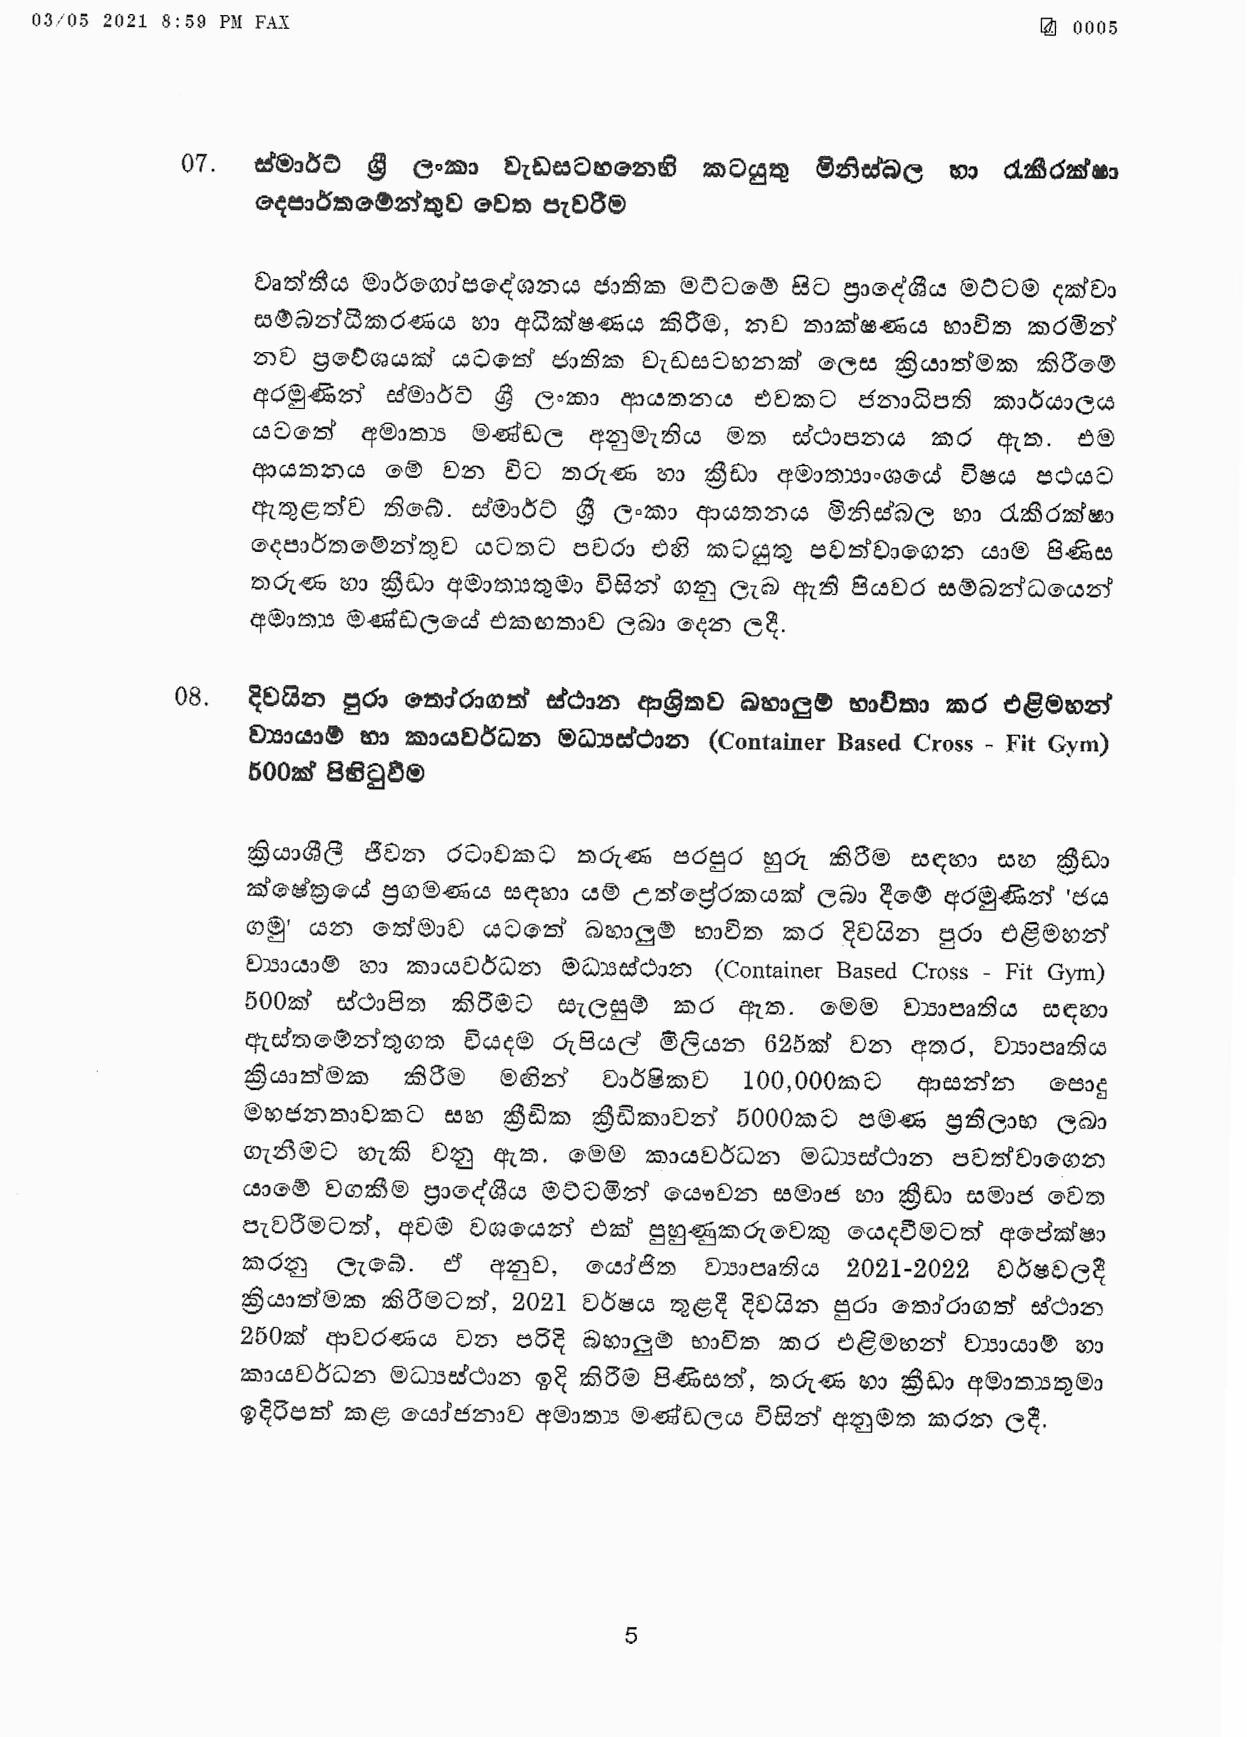 Cabinet Decision on 03.05.2021 page 005